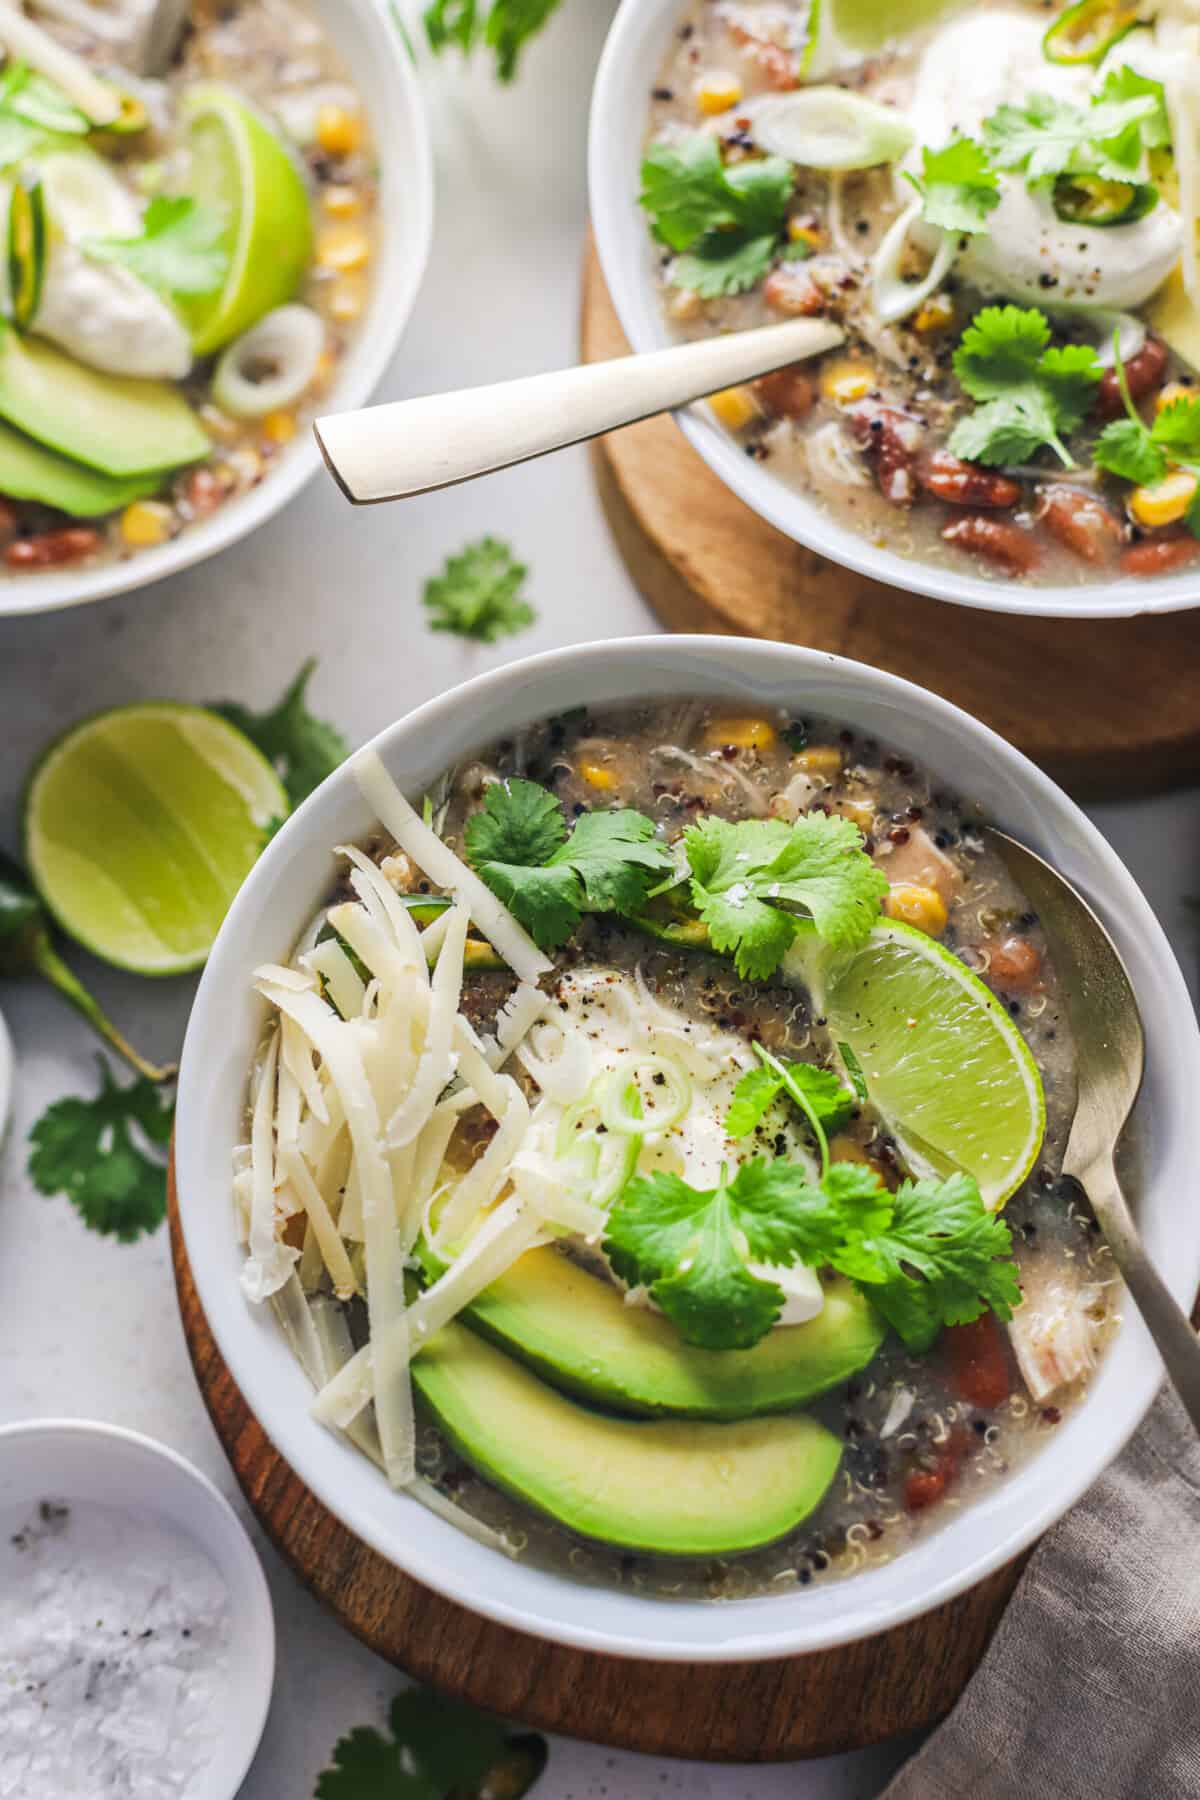 A bowl of chili garnished with avocado slices, shredded cheese, herbs and a lime wedge